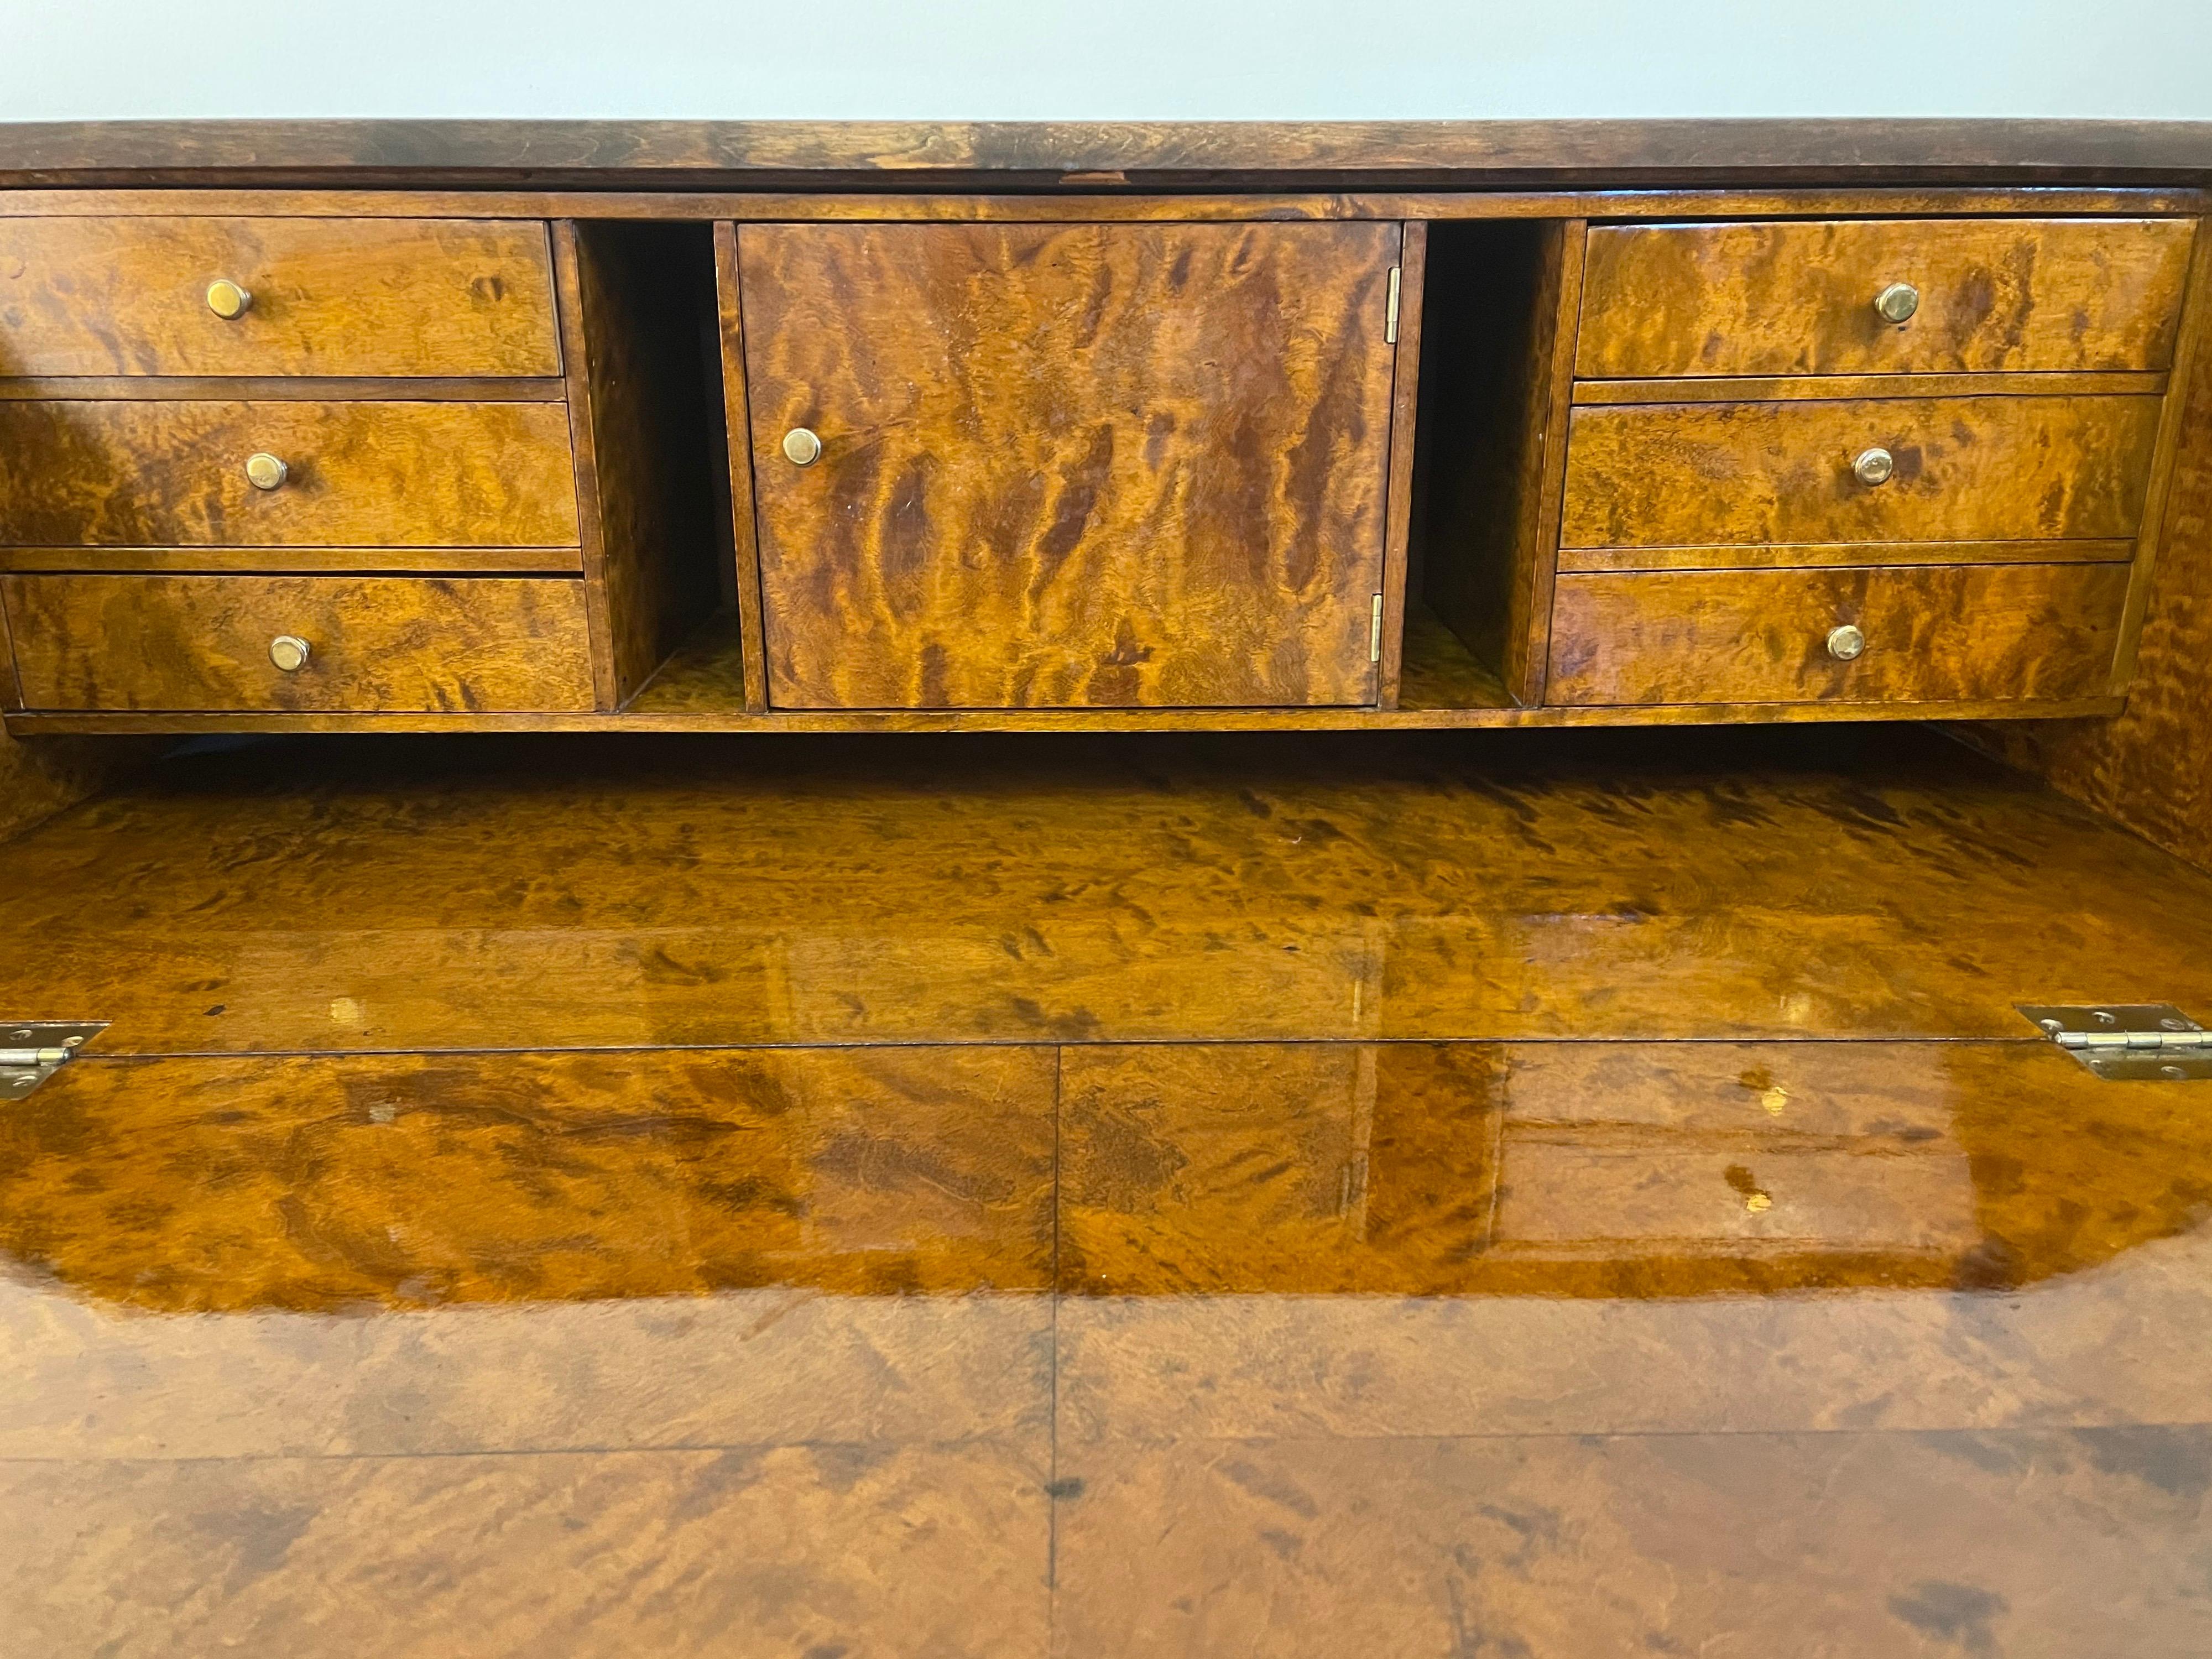 Grace was the inspiration for this lovely birch secretary which makes working from home a joy! Three locking drawers sit beneath a generous drop-front with 6 interior drawers, a pair of nooks, and a center cabinet, for organizing working materials,